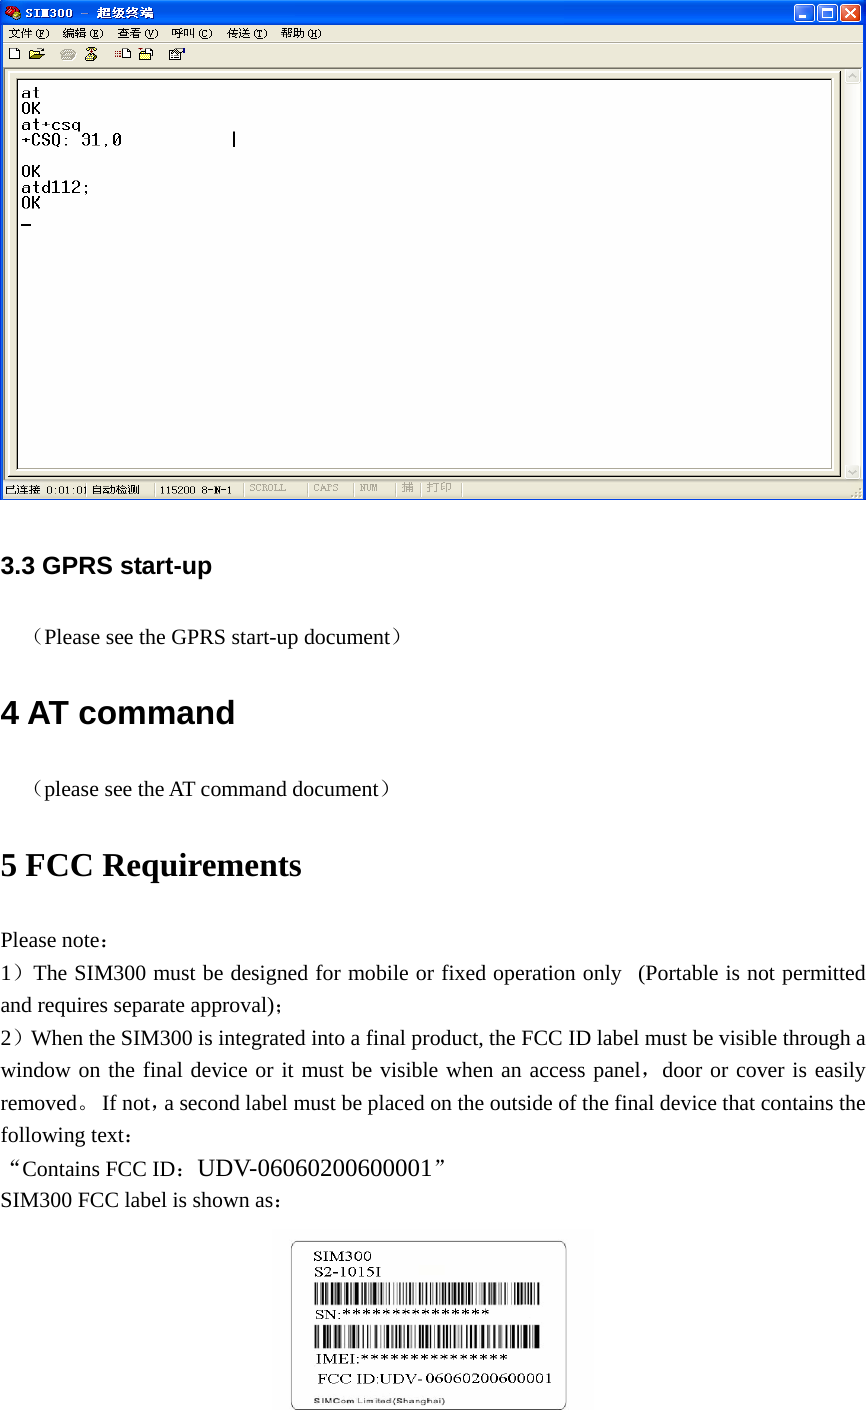  3.3 GPRS start-up （Please see the GPRS start-up document） 4 AT command （please see the AT command document） 5 FCC Requirements Please note： 1）The SIM300 must be designed for mobile or fixed operation only   (Portable is not permitted and requires separate approval)； 2）When the SIM300 is integrated into a final product, the FCC ID label must be visible through a window on the final device or it must be visible when an access panel，door or cover is easily removed。 If not，a second label must be placed on the outside of the final device that contains the following text： “Contains FCC ID：UDV-06060200600001” SIM300 FCC label is shown as：  